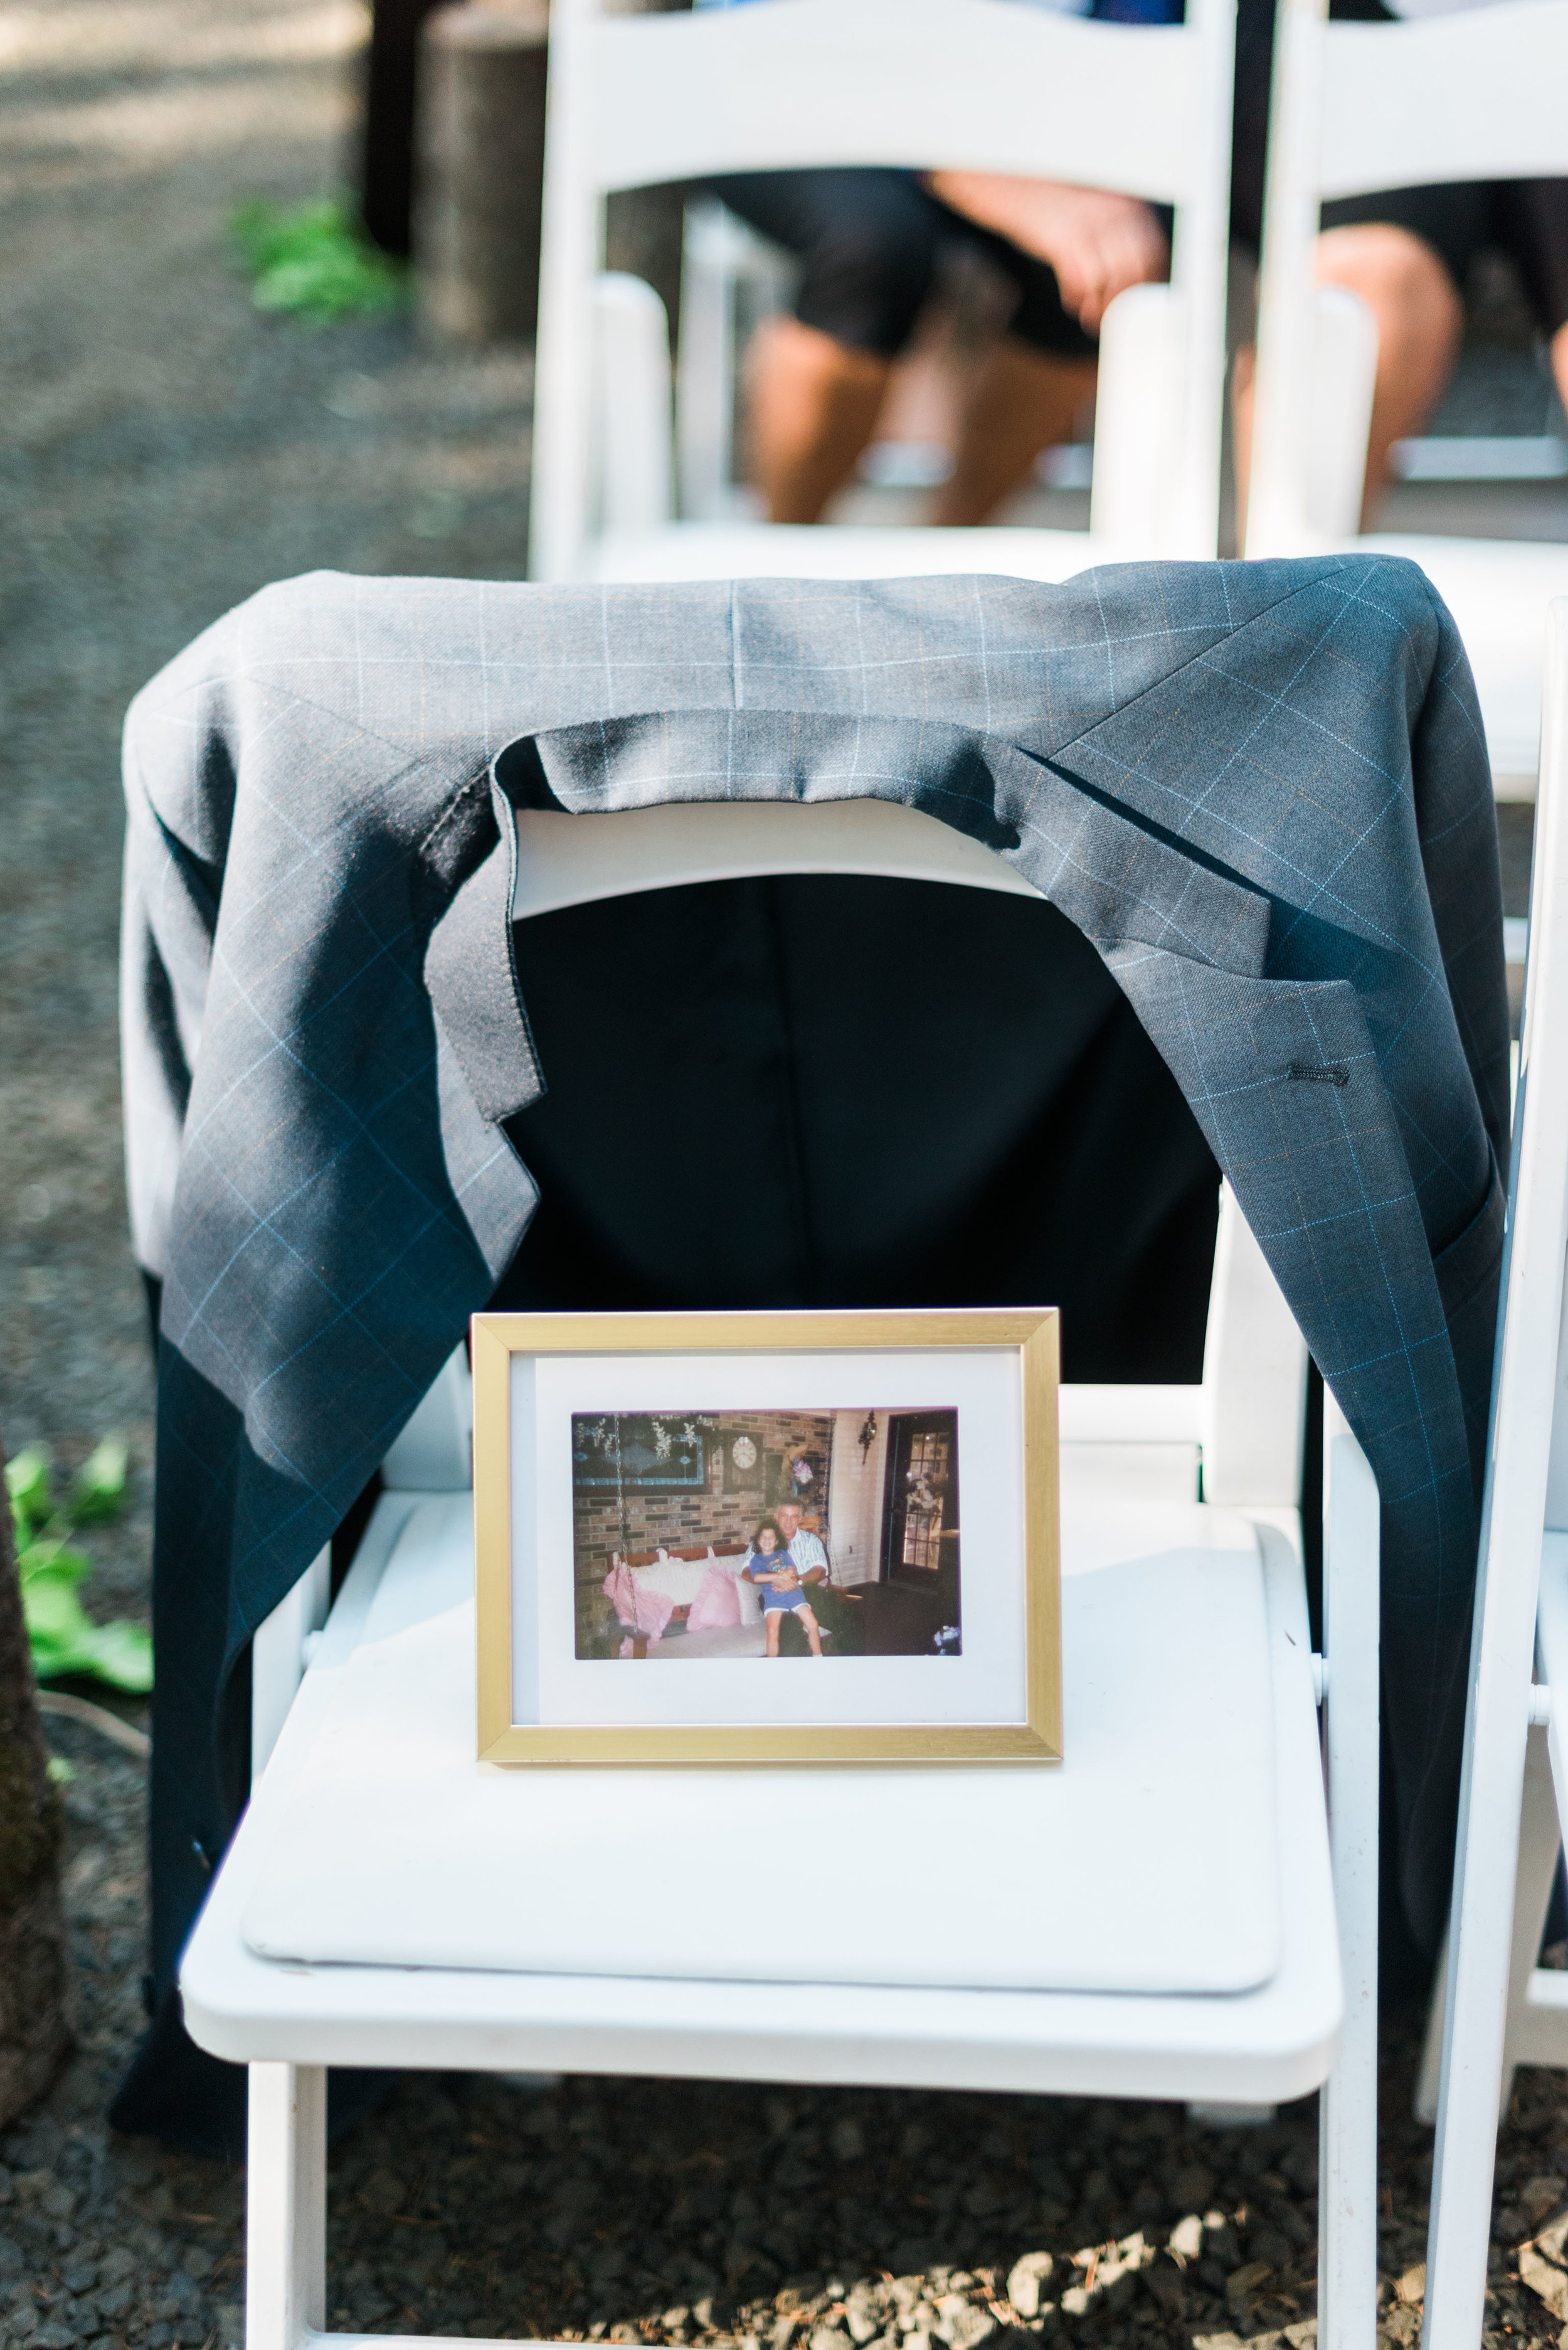 Brooke Summers Photography | Mary + Mitchell Wedding